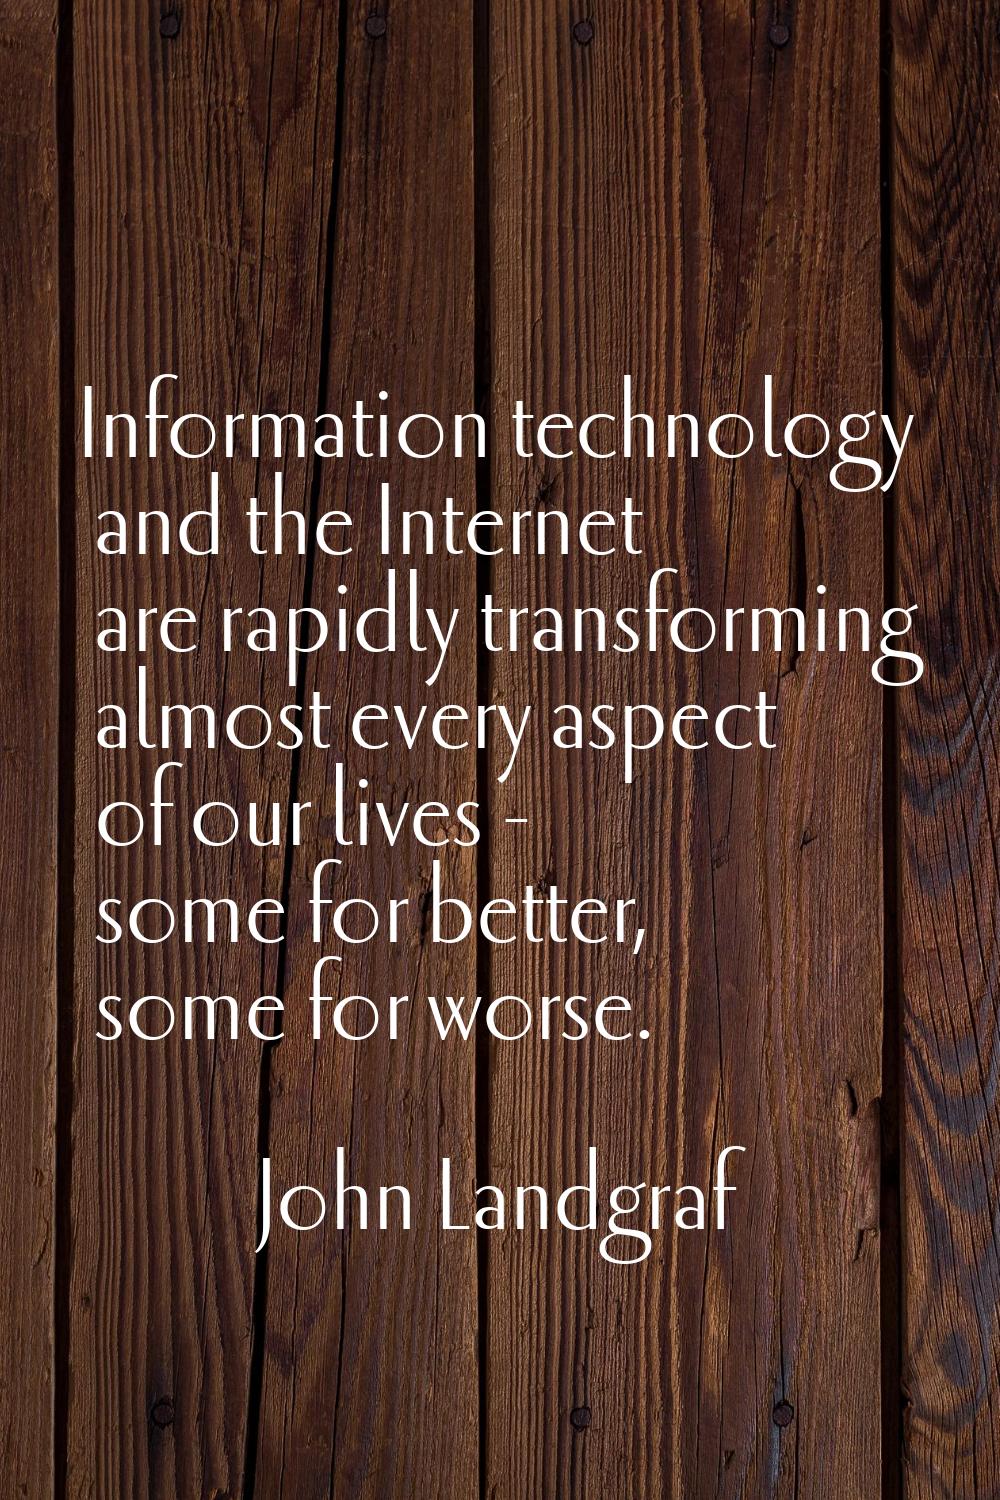 Information technology and the Internet are rapidly transforming almost every aspect of our lives -